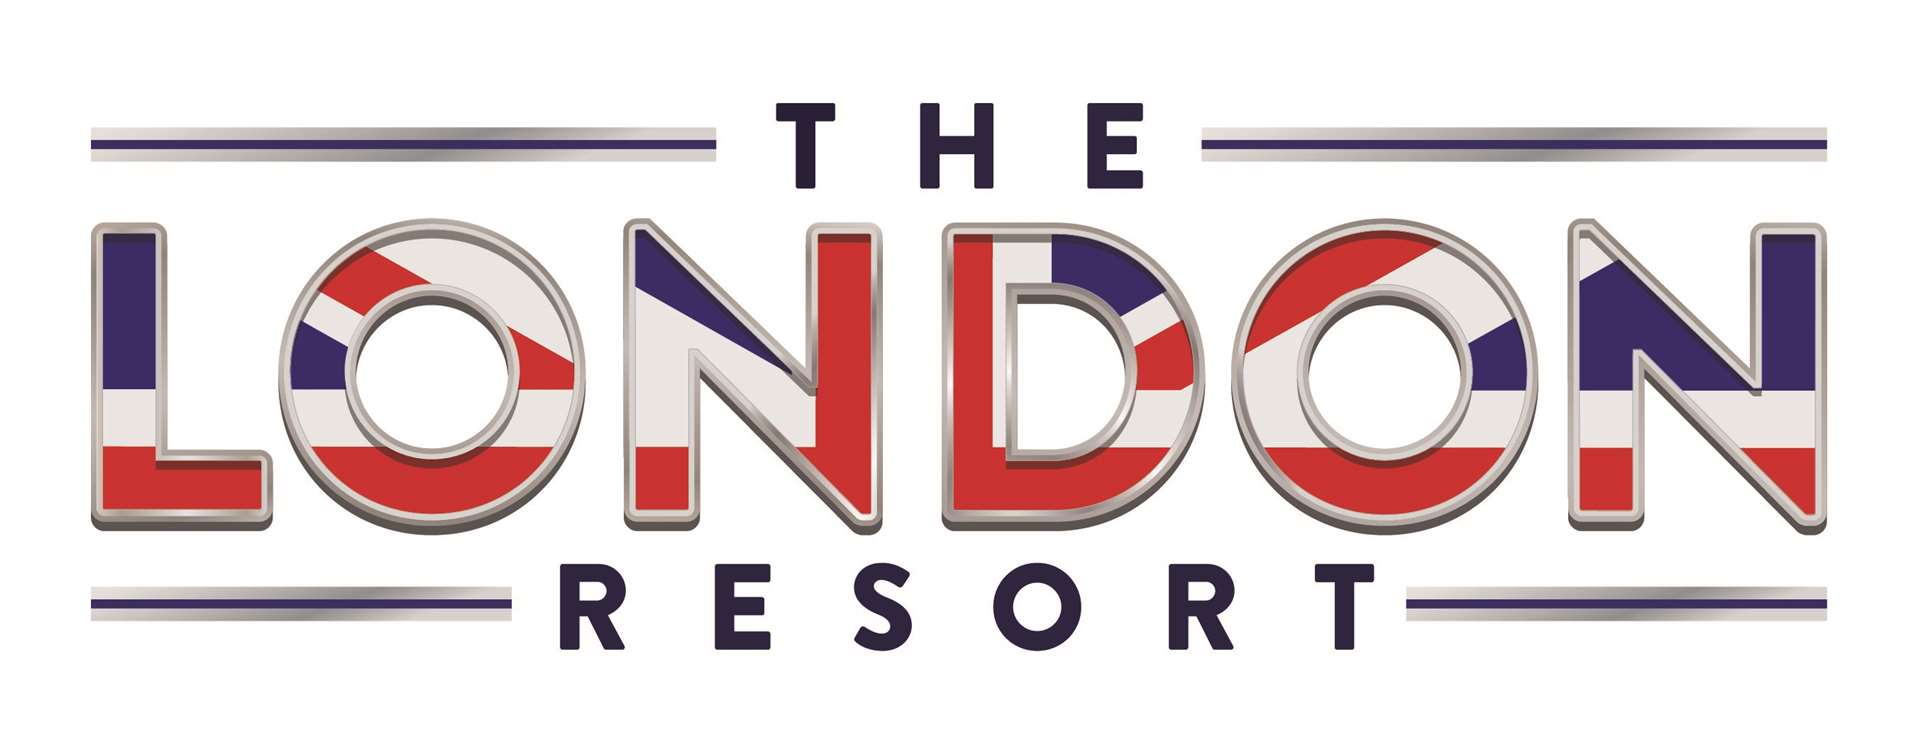 Developers have revealed a new logo for The London Resort